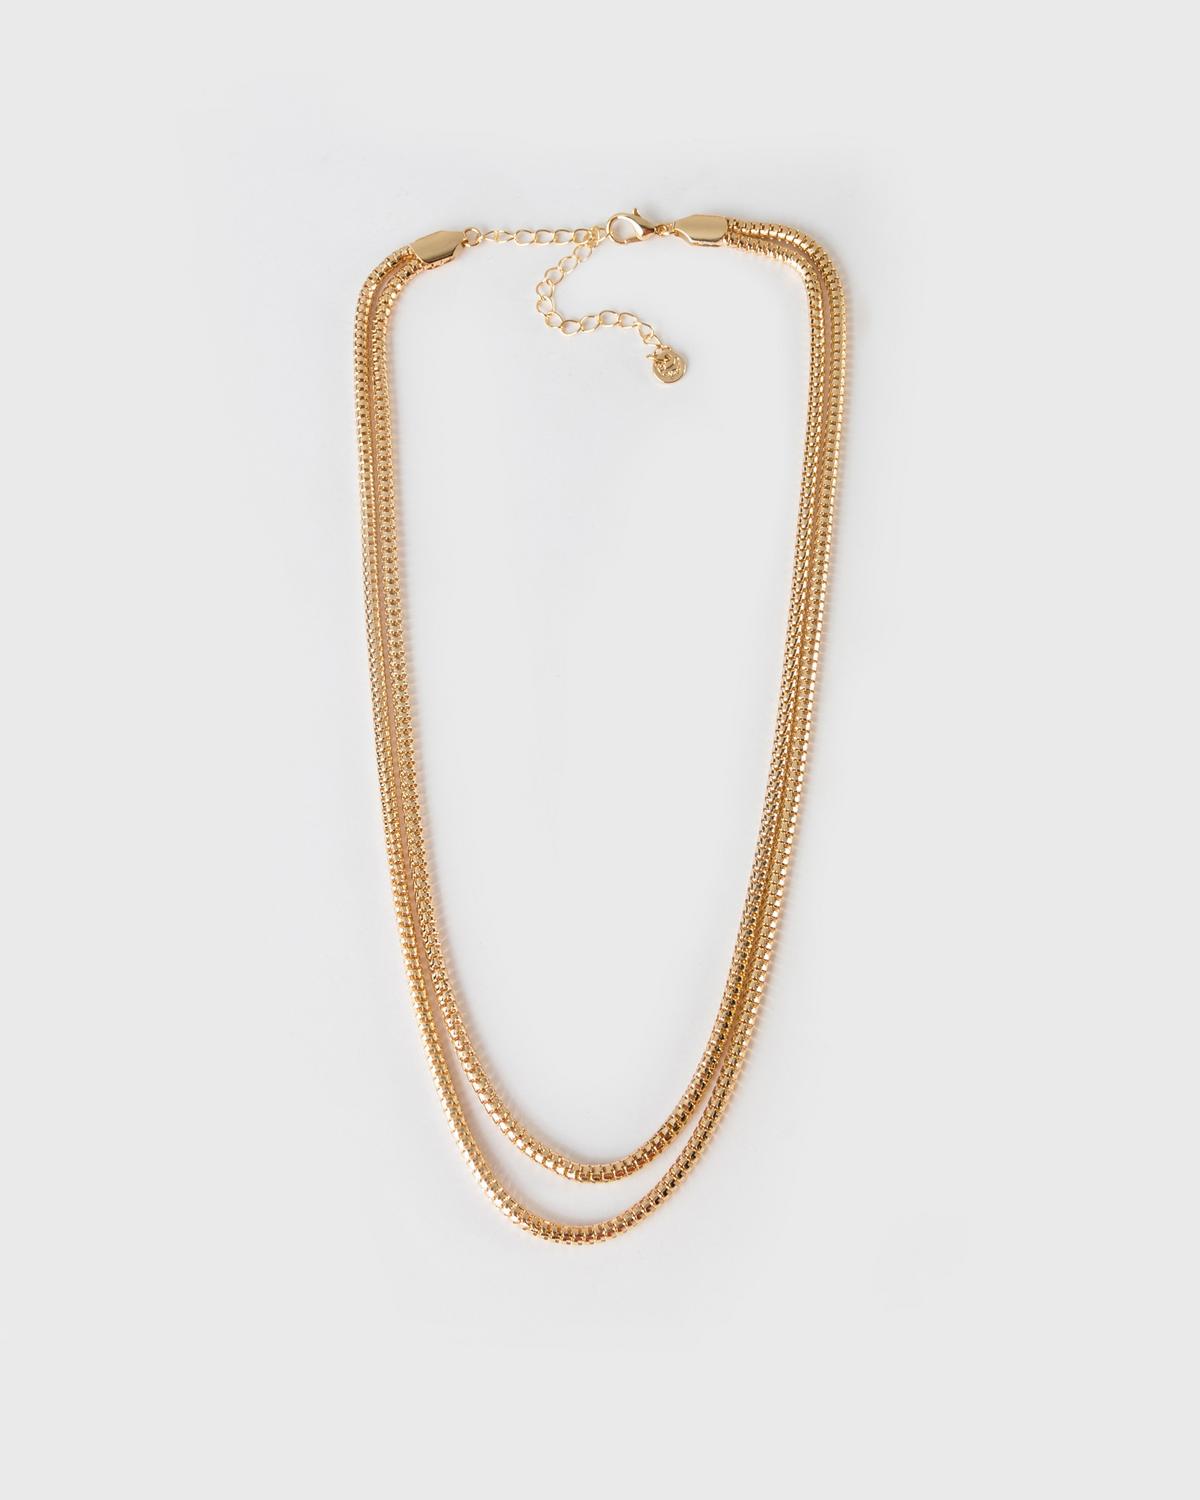 Women’s Two-Strand Snake Chain Necklace  -  Gold